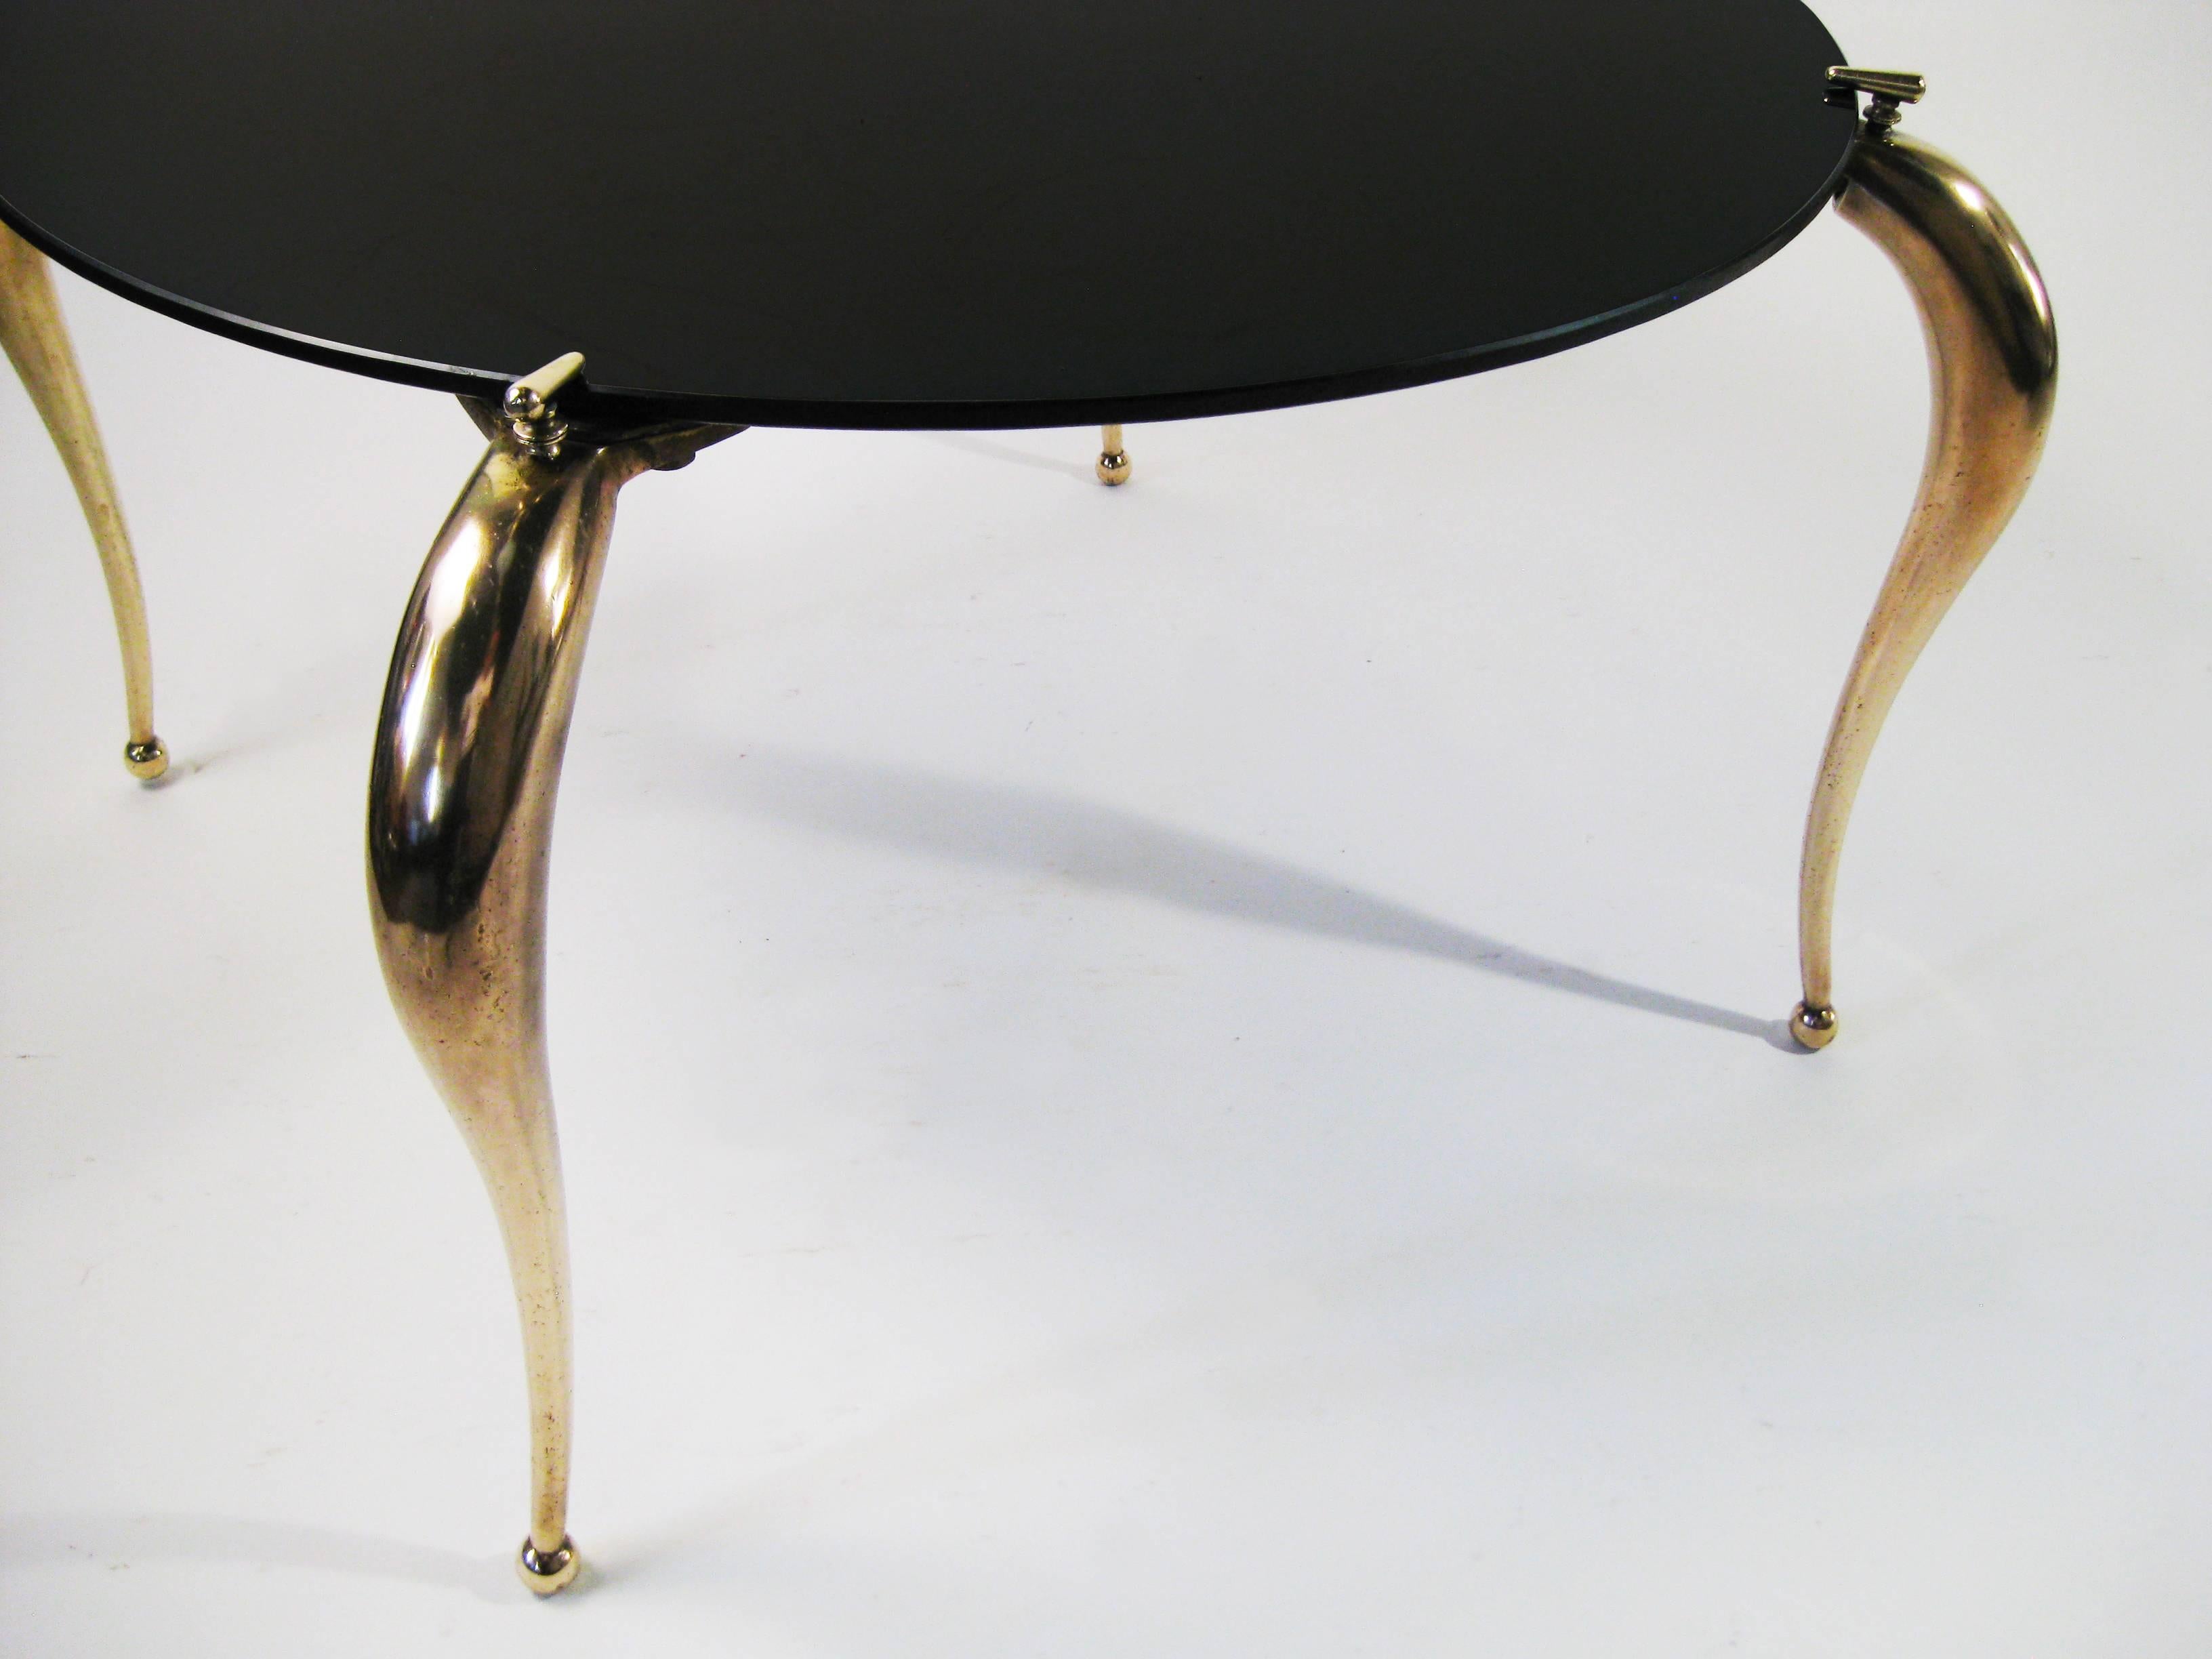 The supple, delicately curved yet formidable bronze legs of this center table support and grasp the original black Carrara glass tabletop as though it were a gemstone, setting the glass with an ingenious clasp on the upper end of each leg. A table